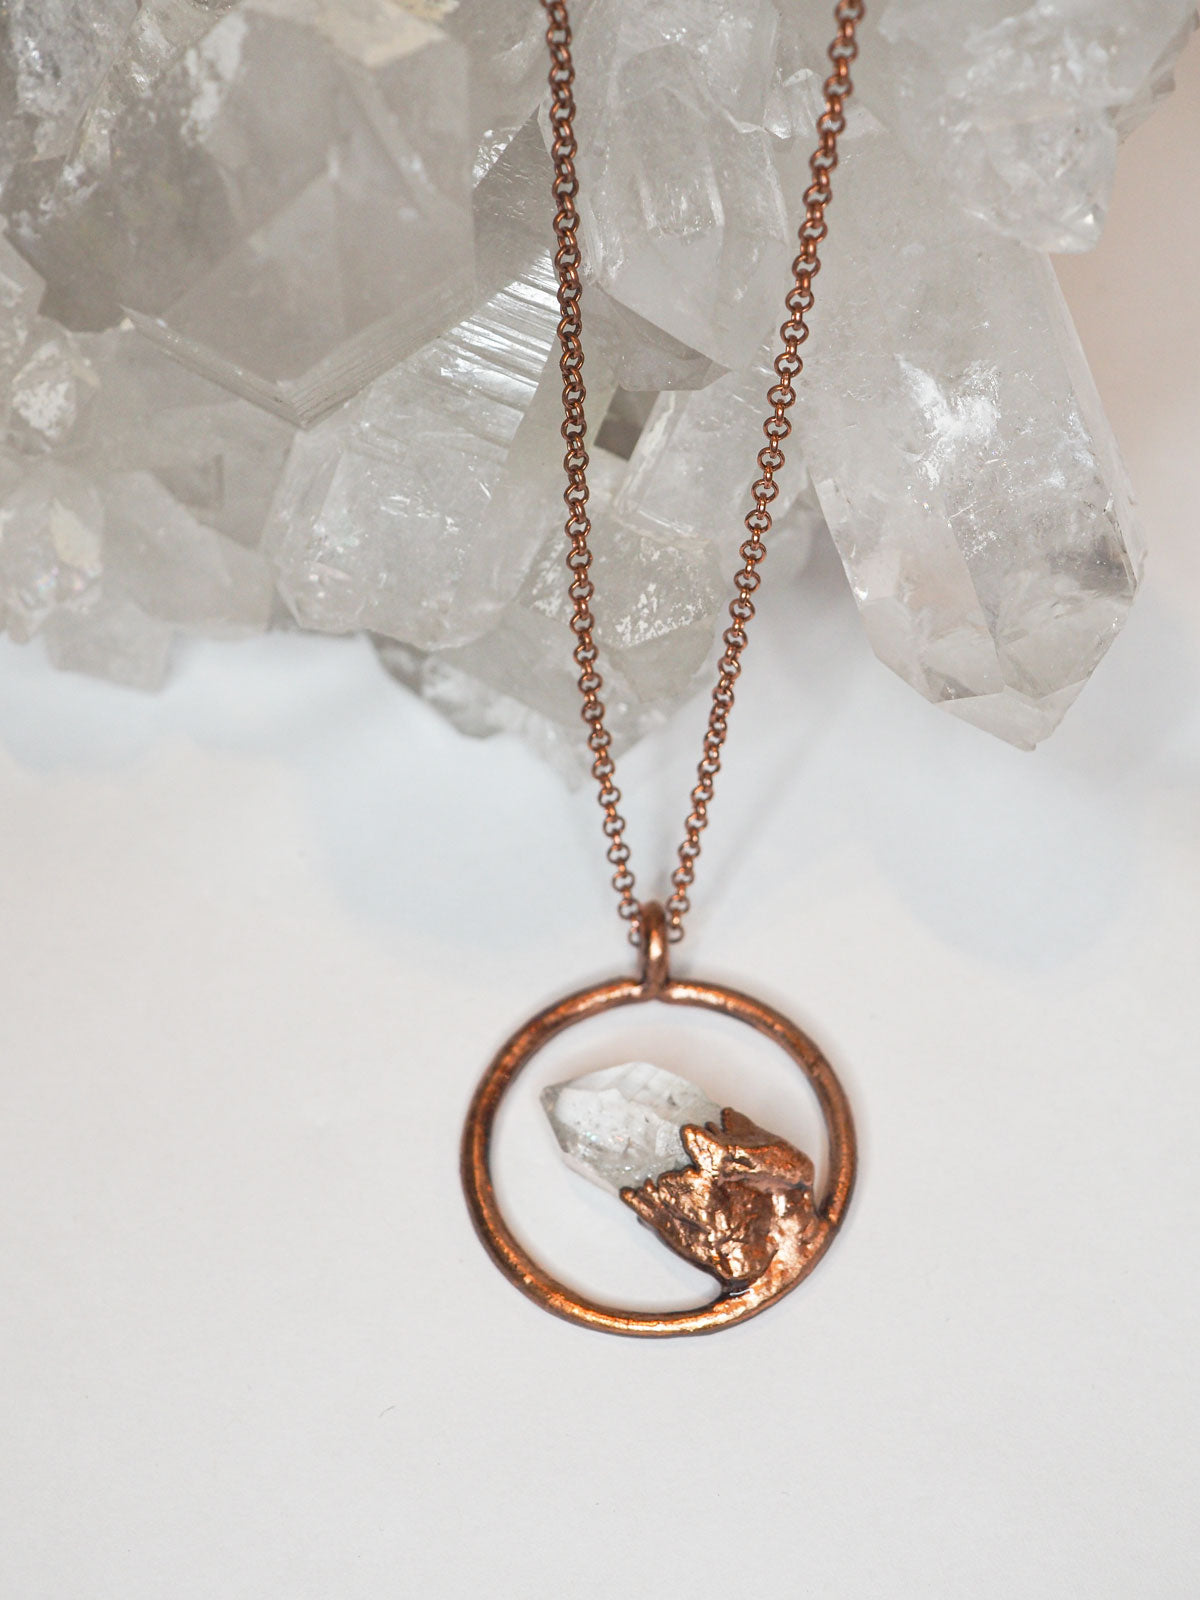 Copper chain necklace with a clear quartz crystal point inside a round copper circle